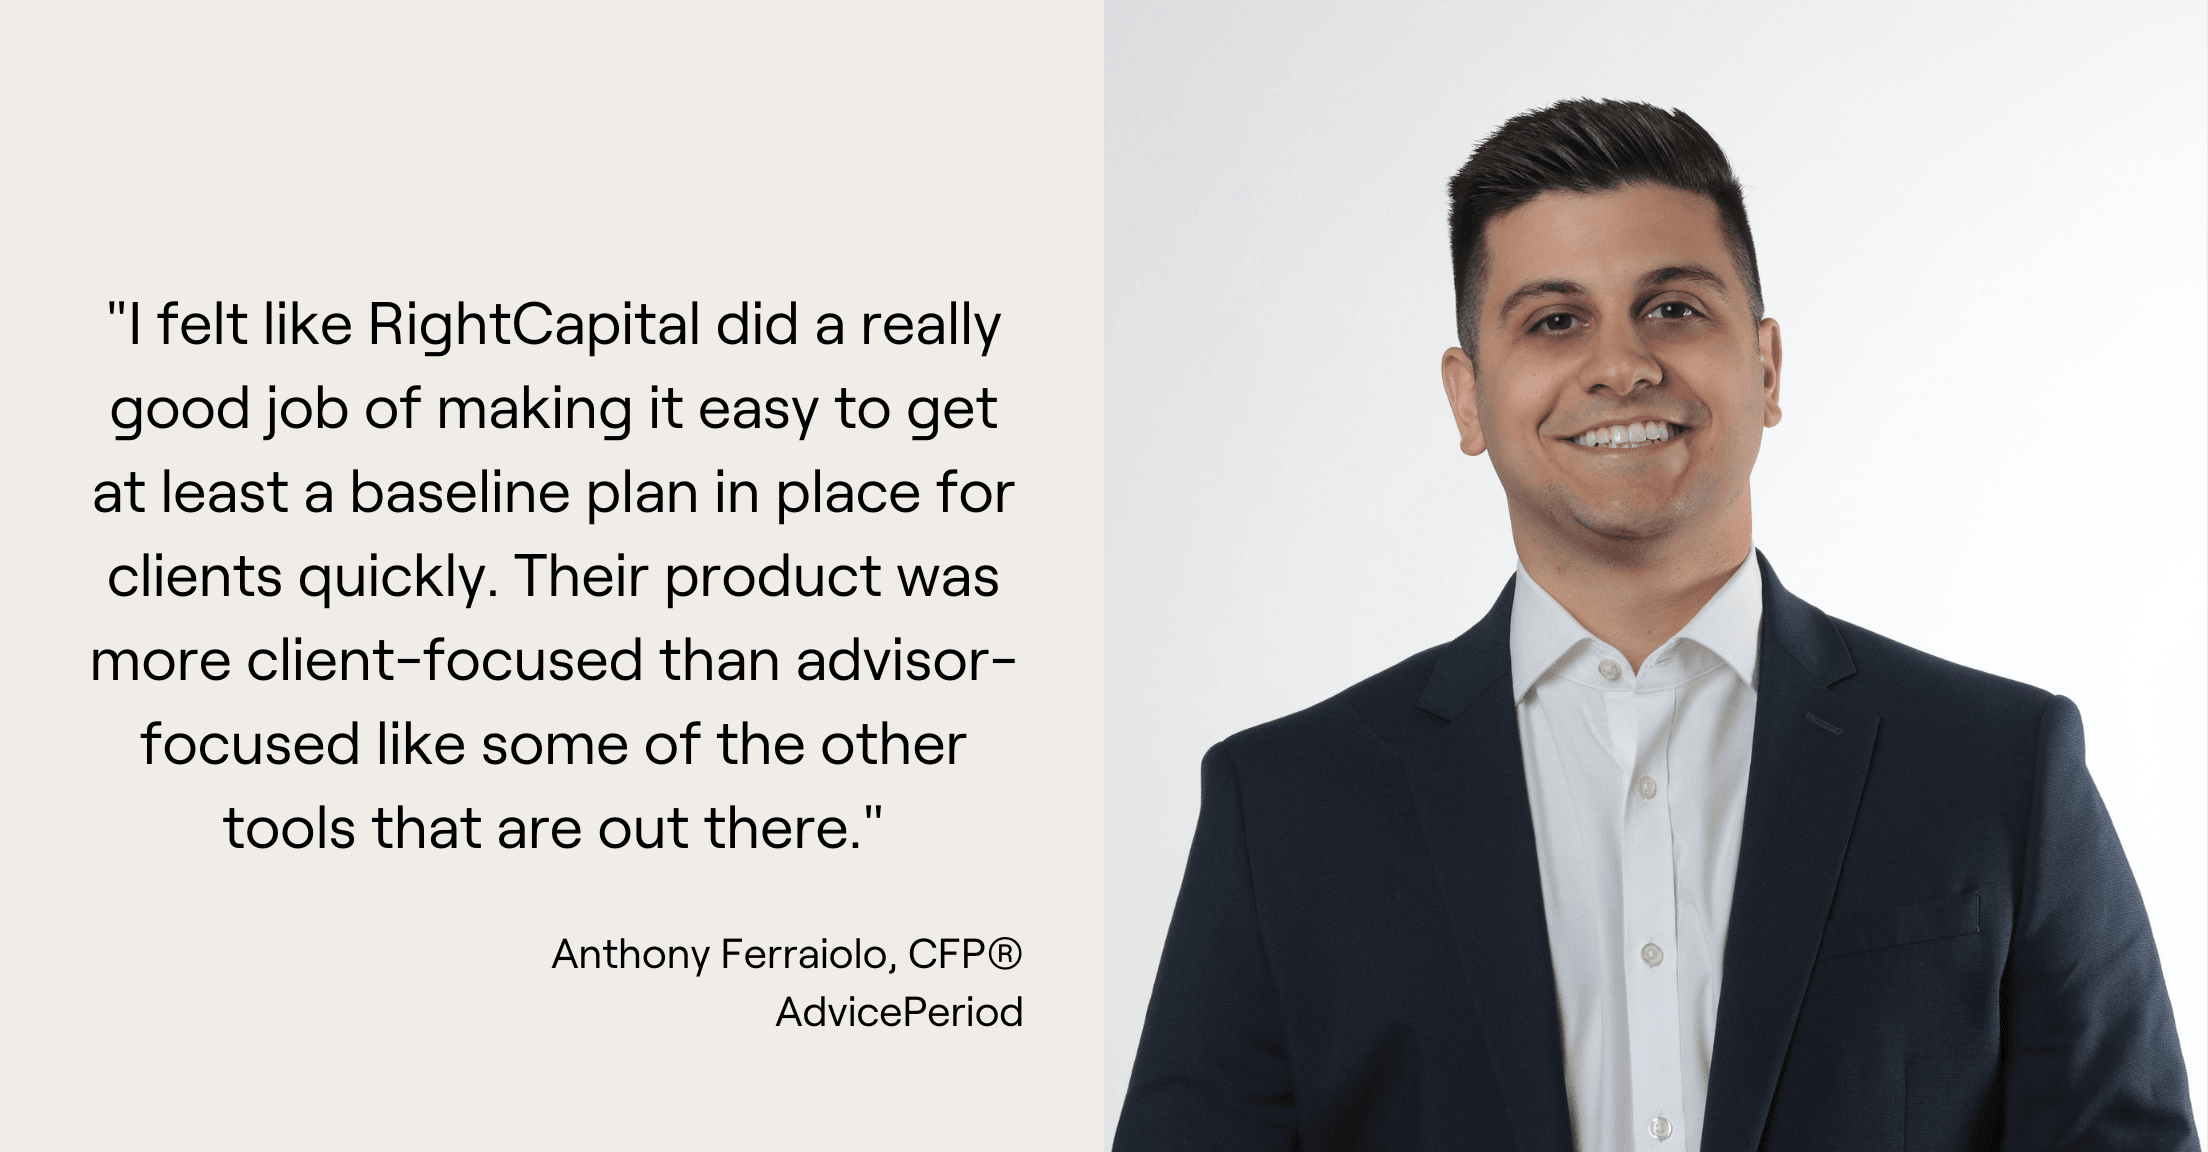 Anthony Ferraiolo headshot and quote, "I felt like RightCapital did a really good job of making it easy to get at least a baseline plan in place for clients quickly. Their product was more client-focused than advisor-focused like some of the other tools that are out there."